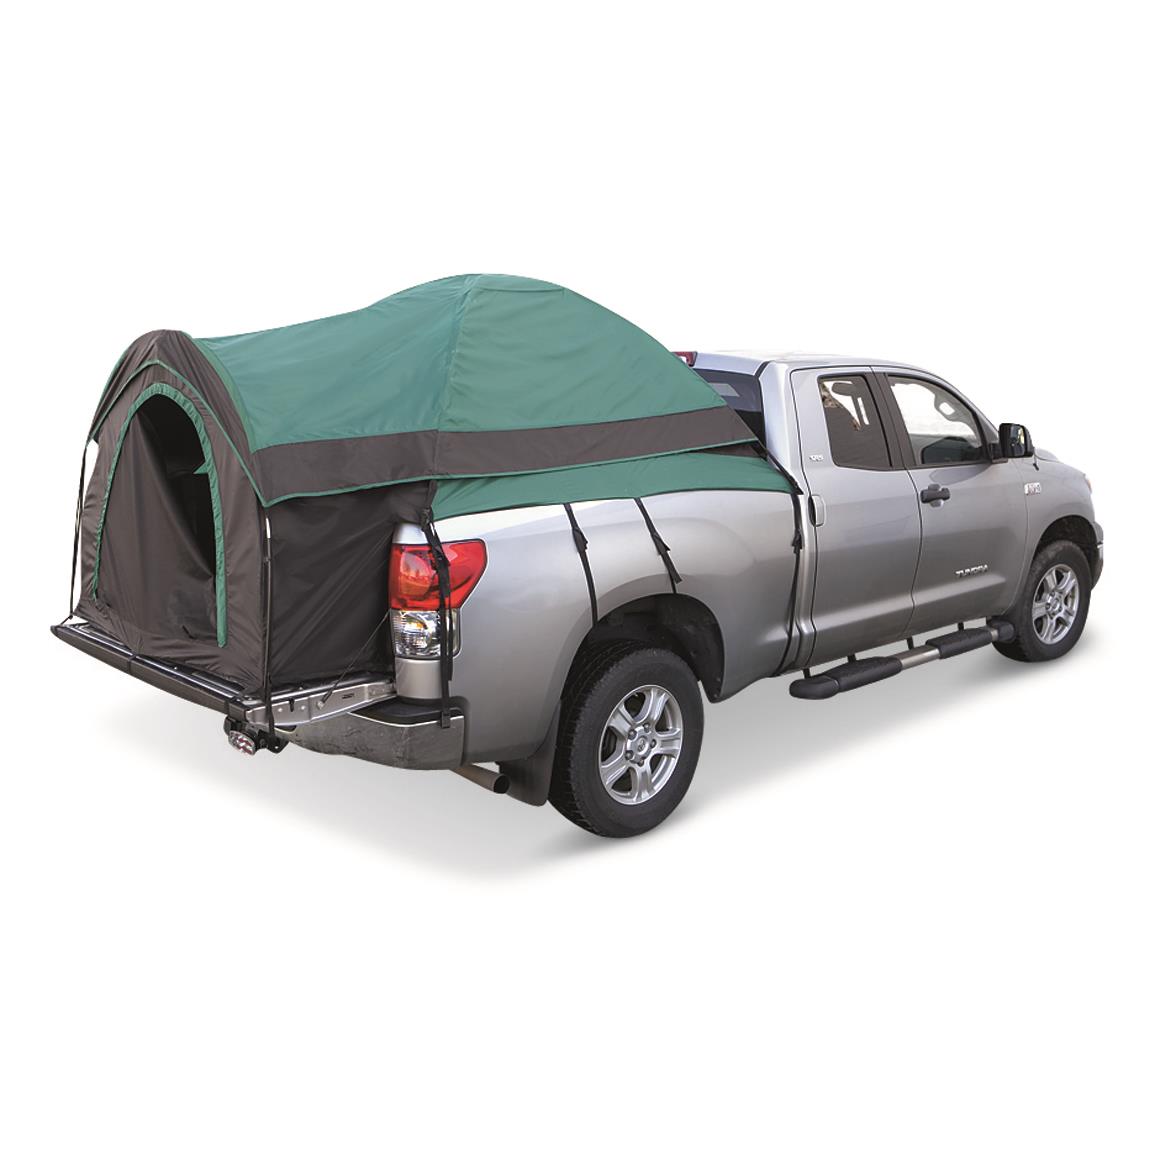 Guide Gear Compact Truck Tent | Truck tent, Truck bed tent, Truck tent  camping